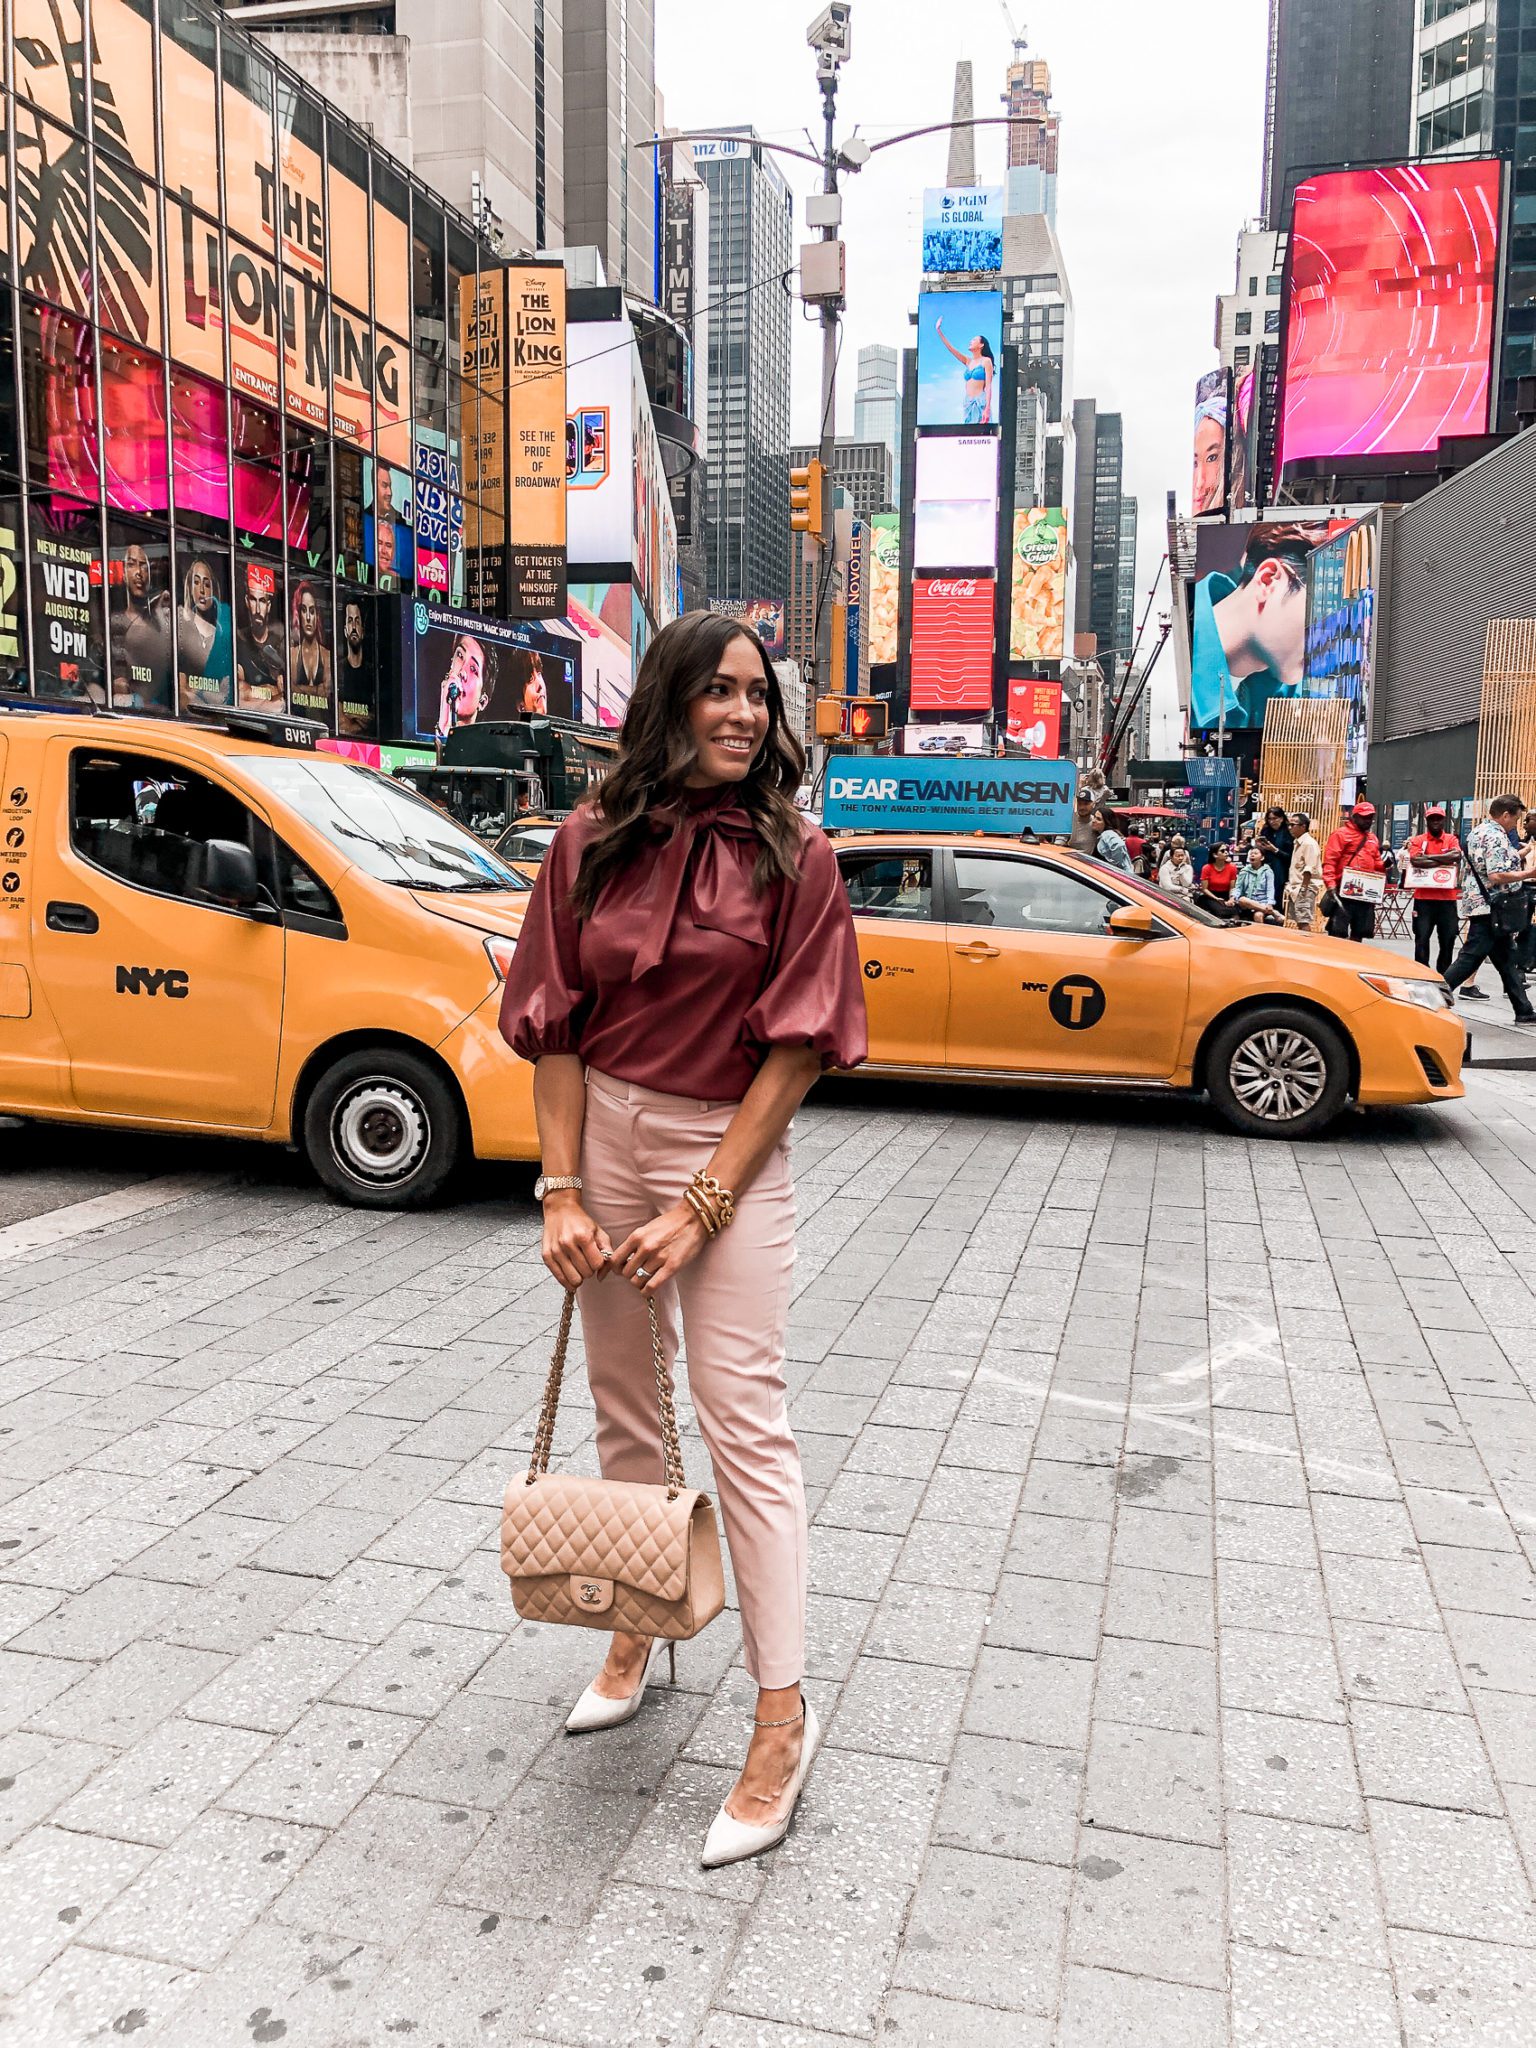 Instagram worthy places in NYC - Time Square